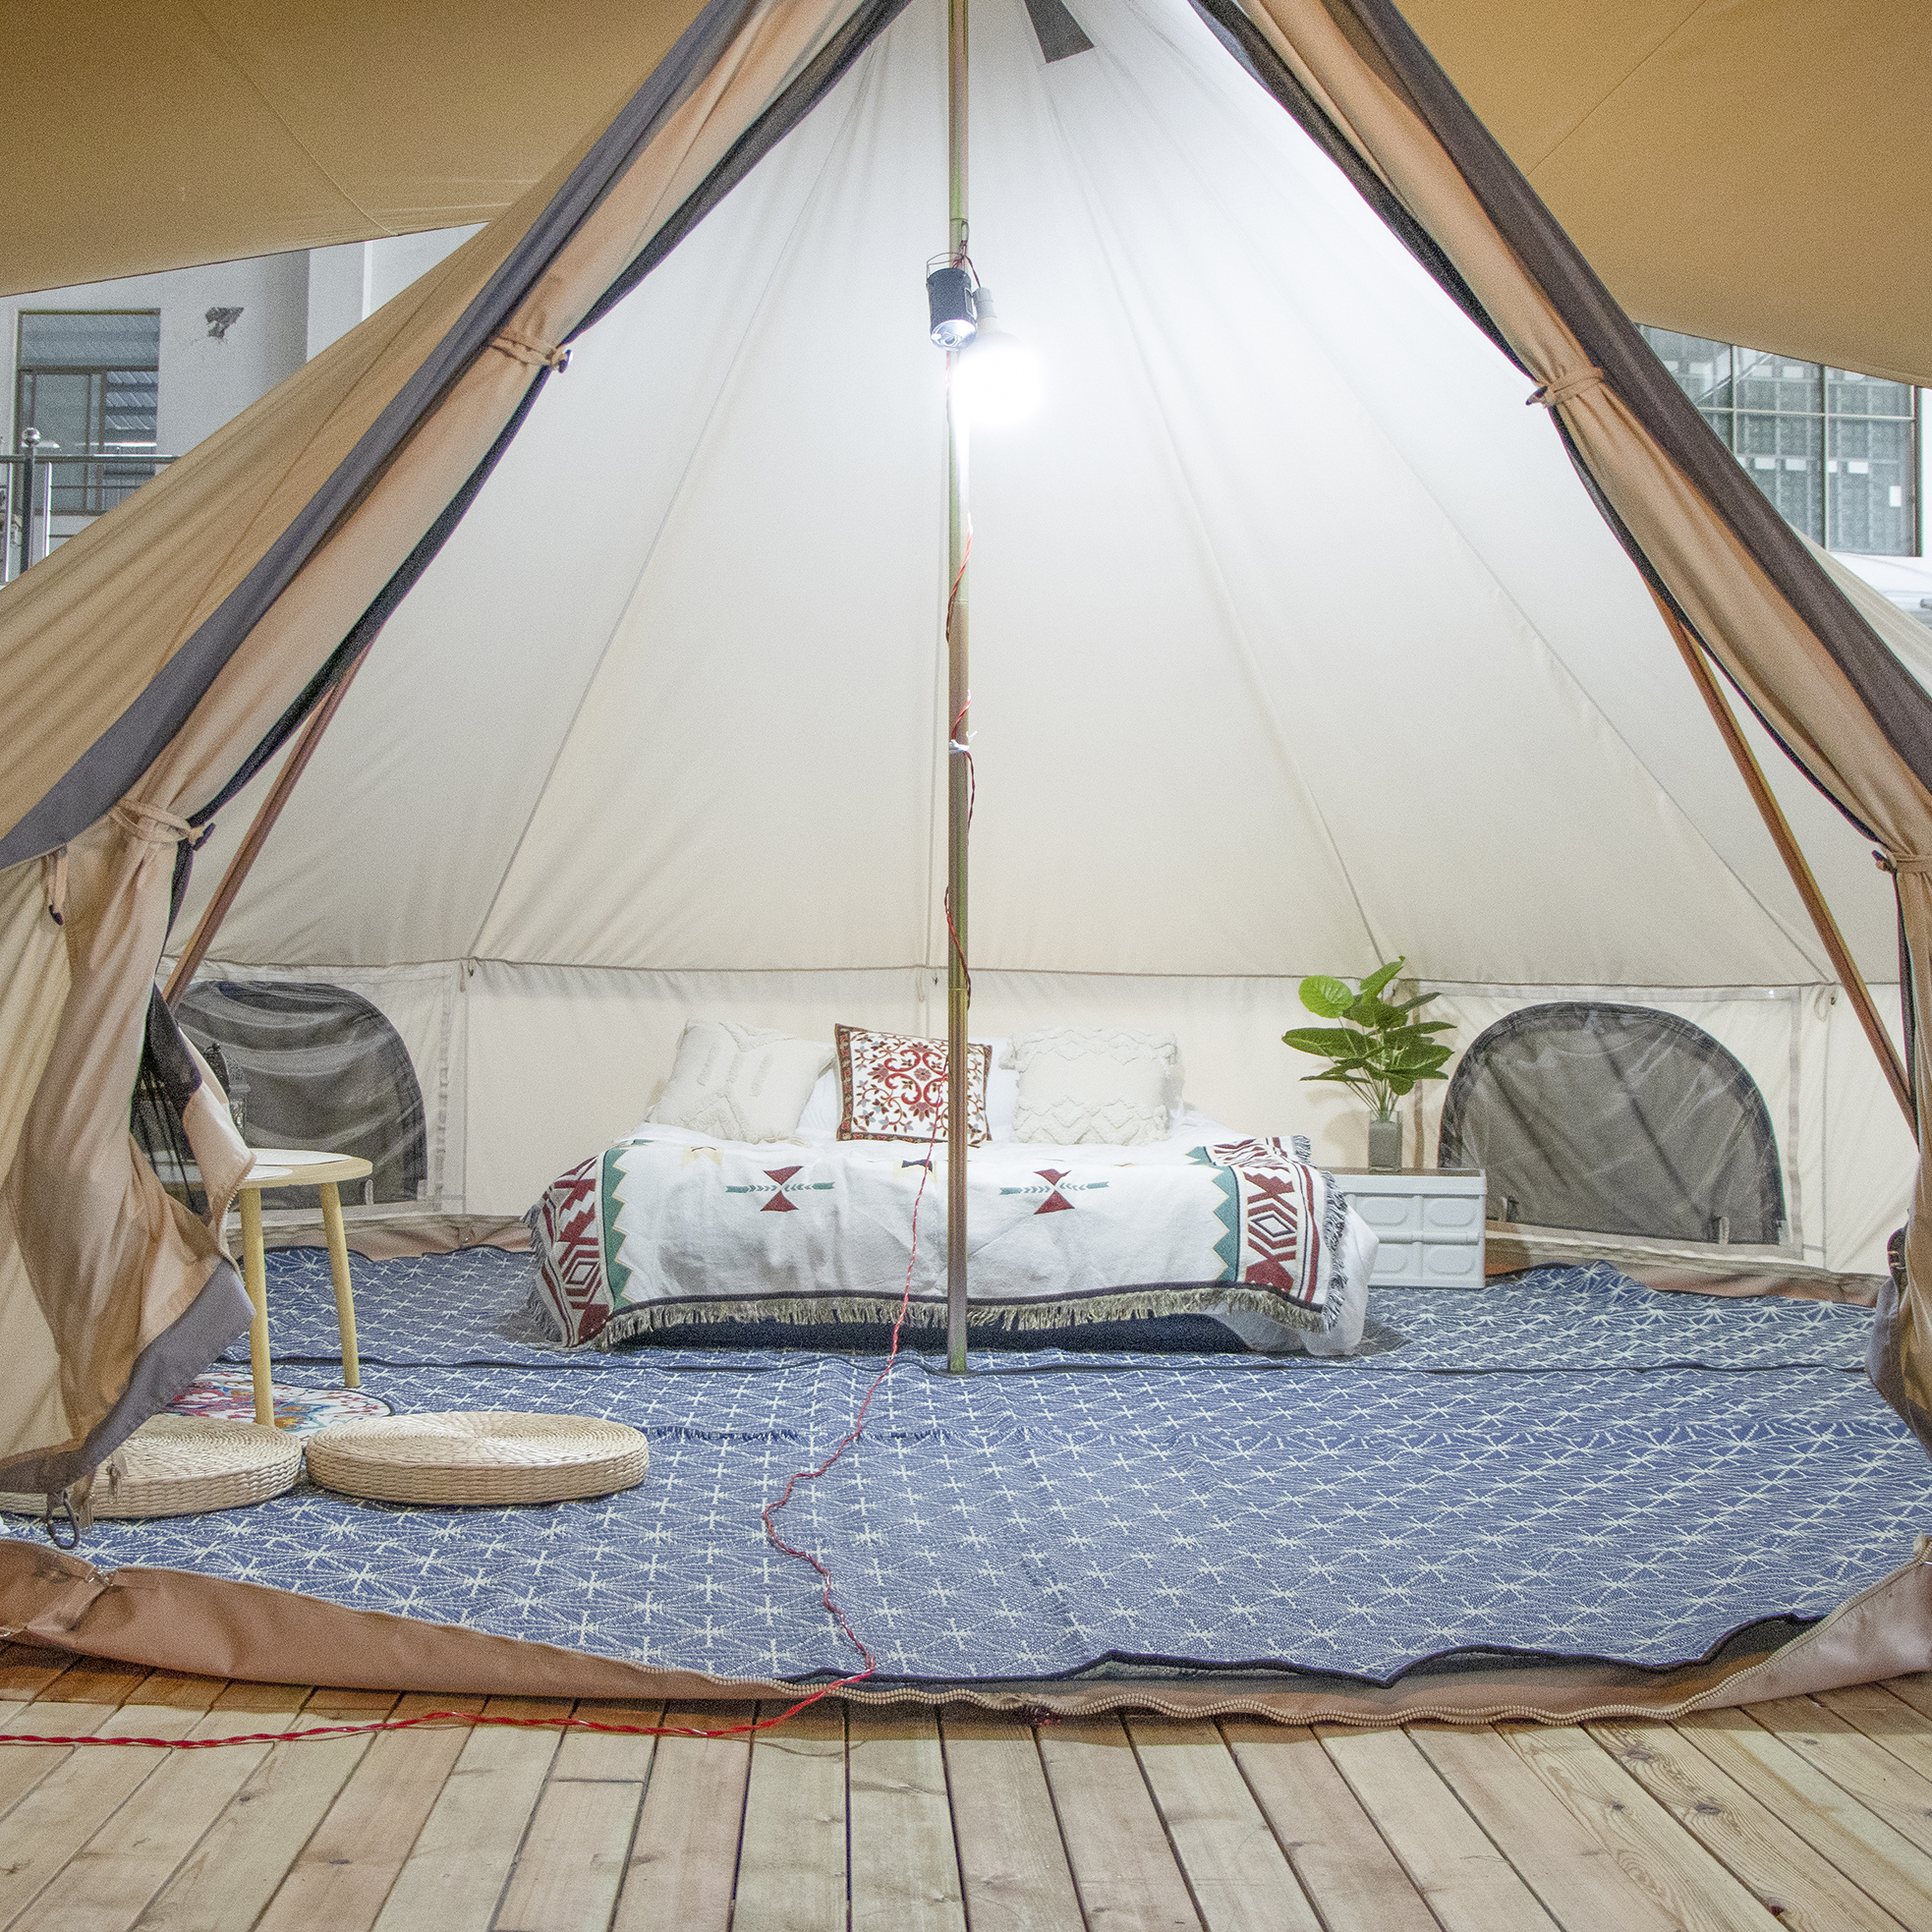 Simplifying Camping with Easy-to-Set-Up Bell Tents